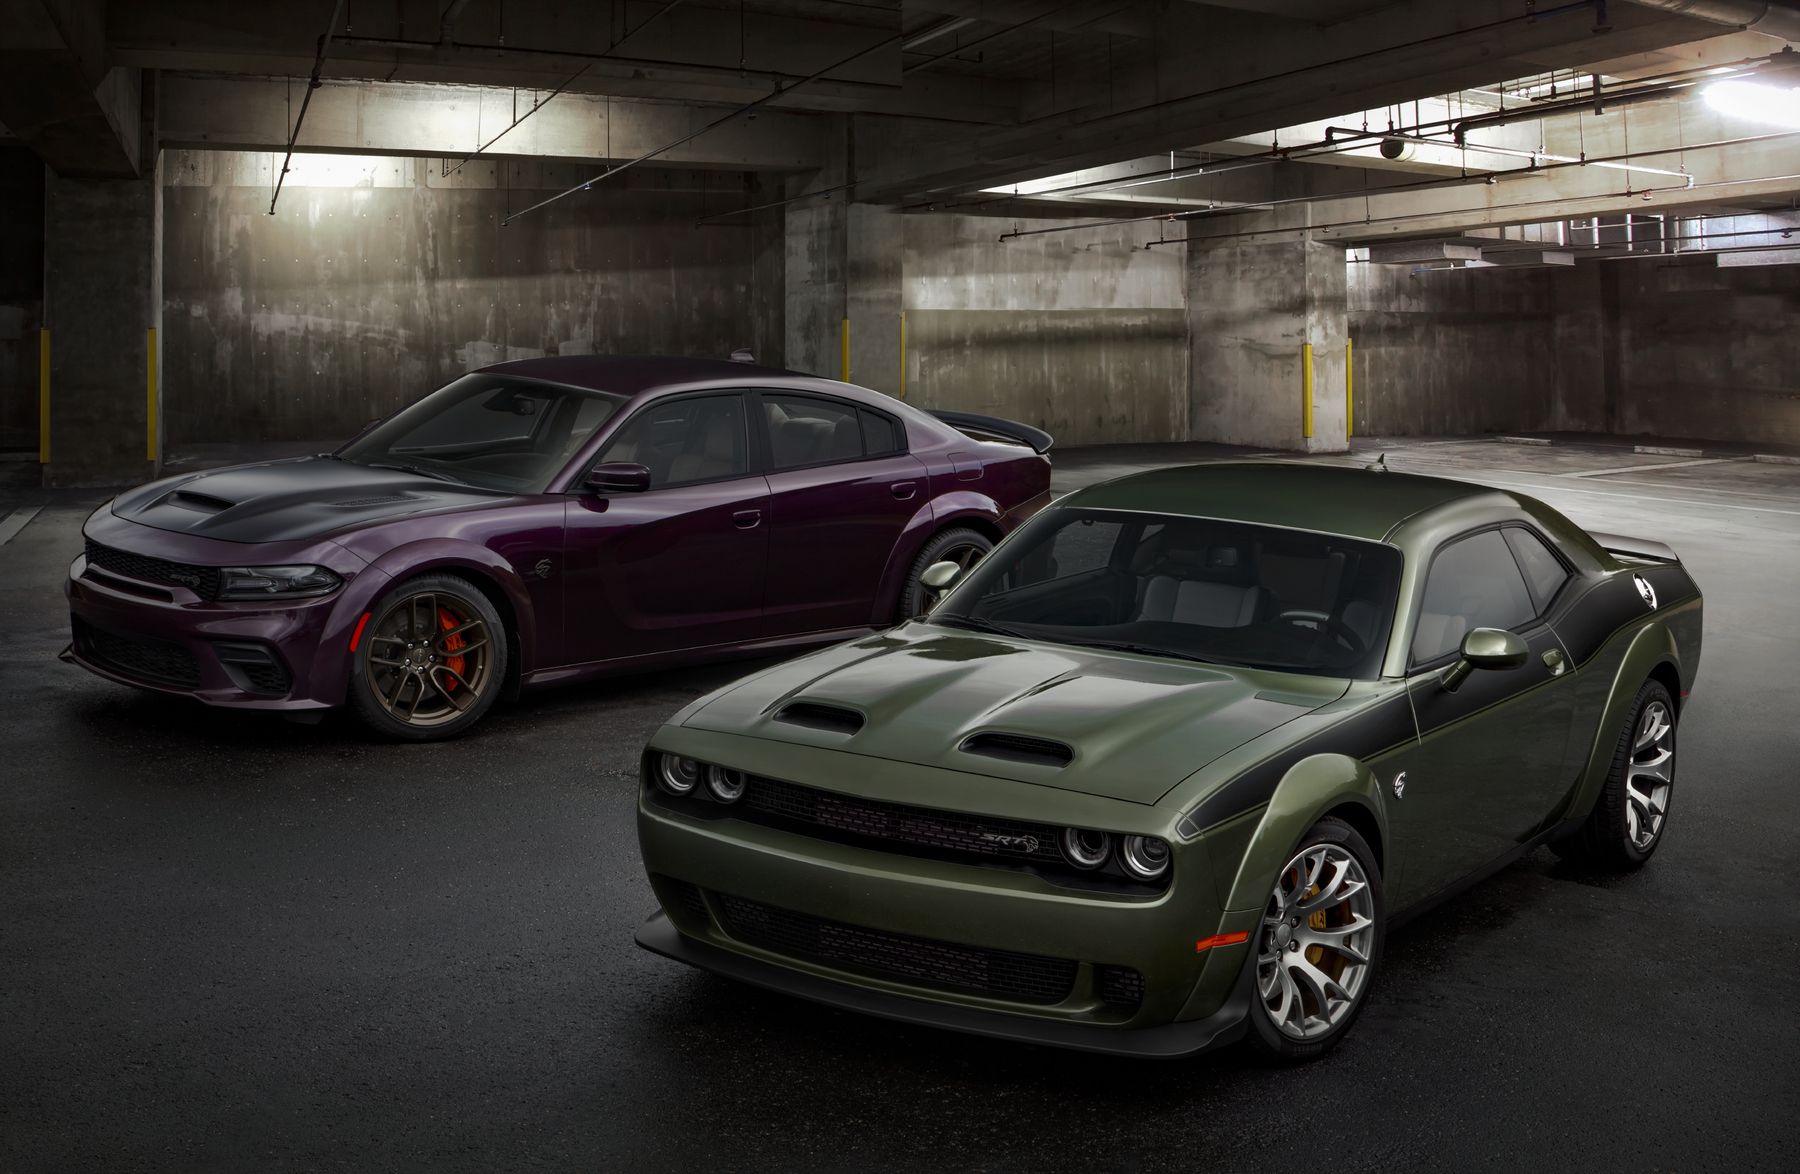 Dodge's 'Jailbreak' models let you customize your Challenger, Charger |  Driving